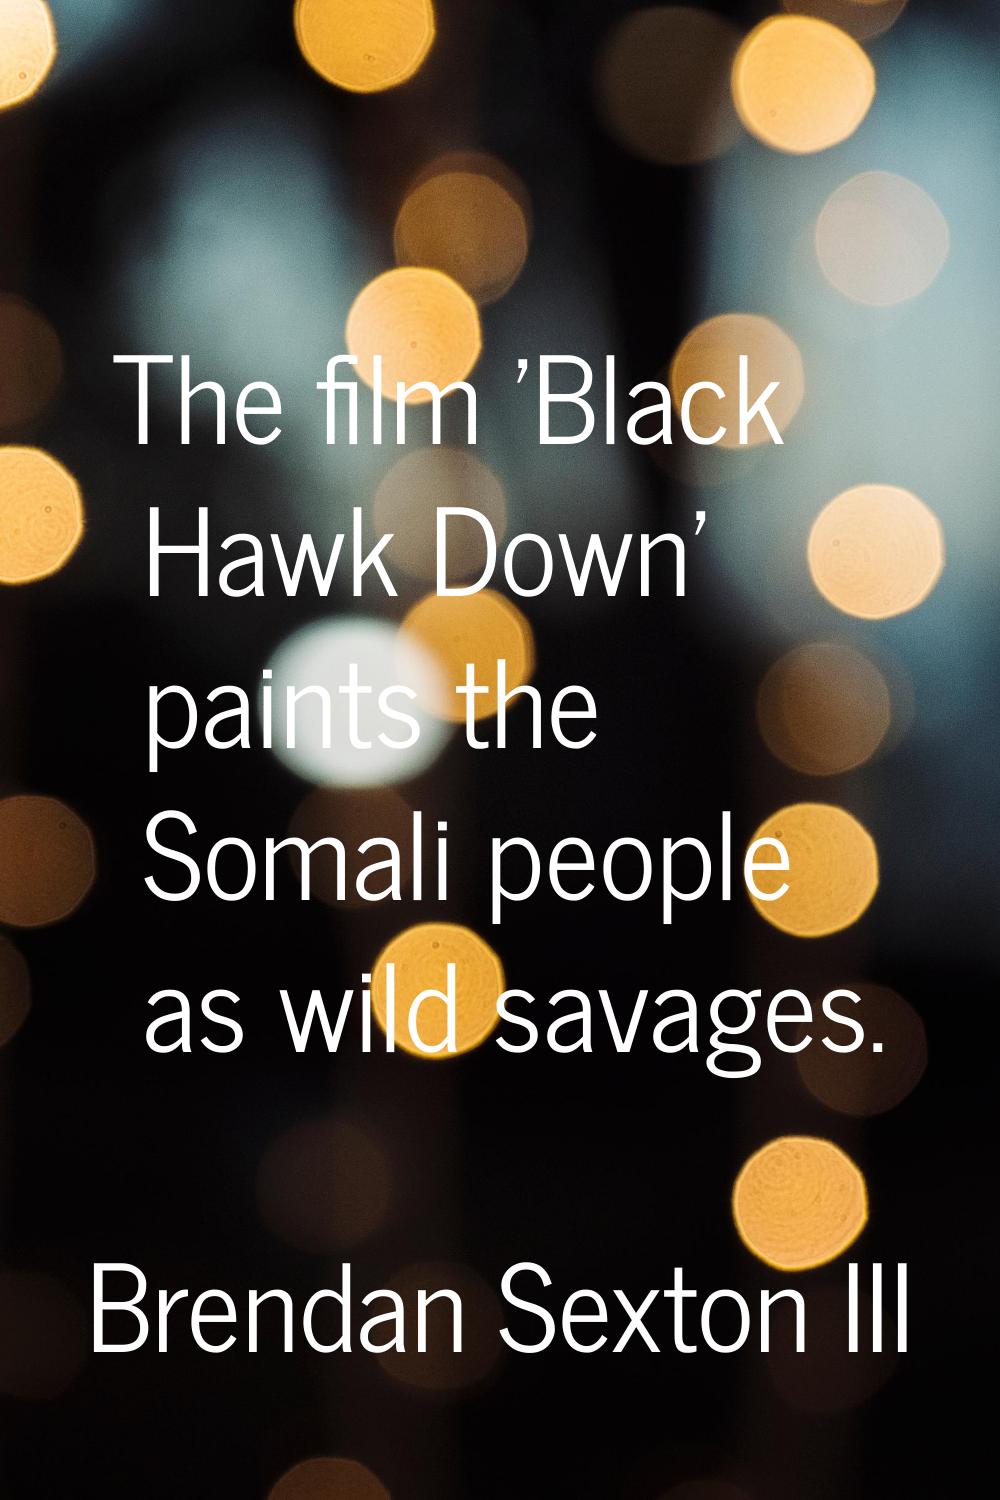 The film 'Black Hawk Down' paints the Somali people as wild savages.